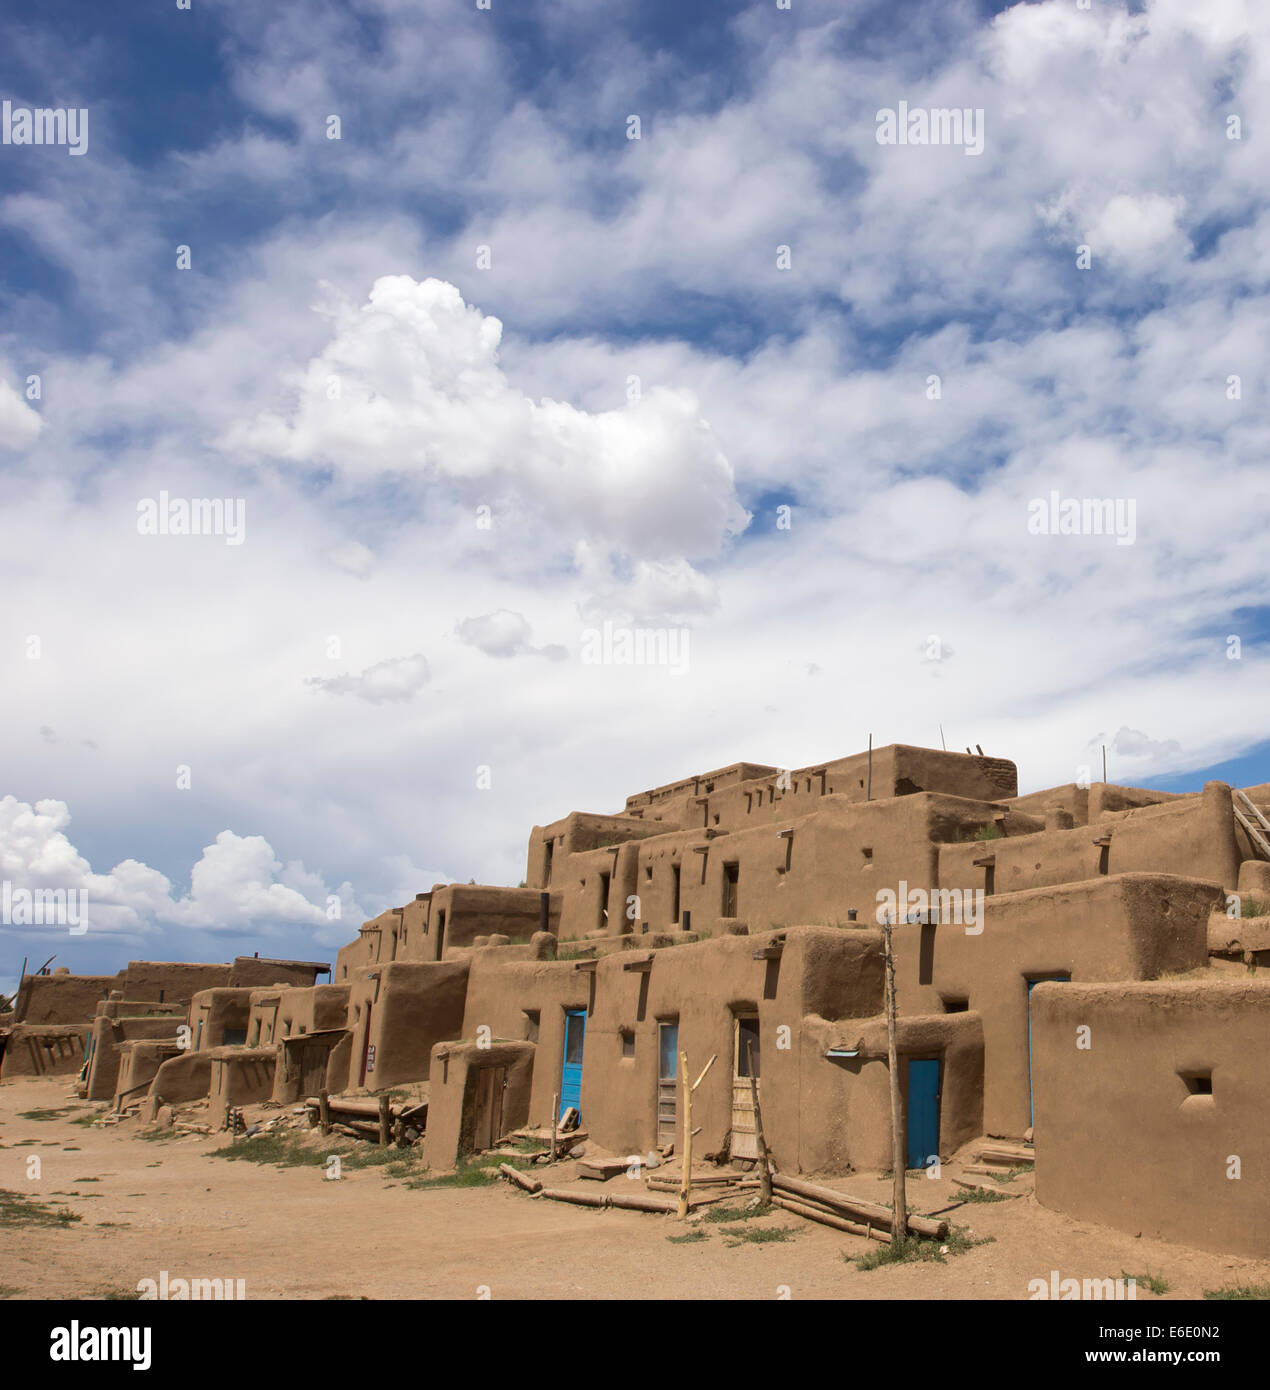 Taos Pueblo in northern New Mexico, a Native American community, National Historic Landmark and World Heritage Site. Stock Photo